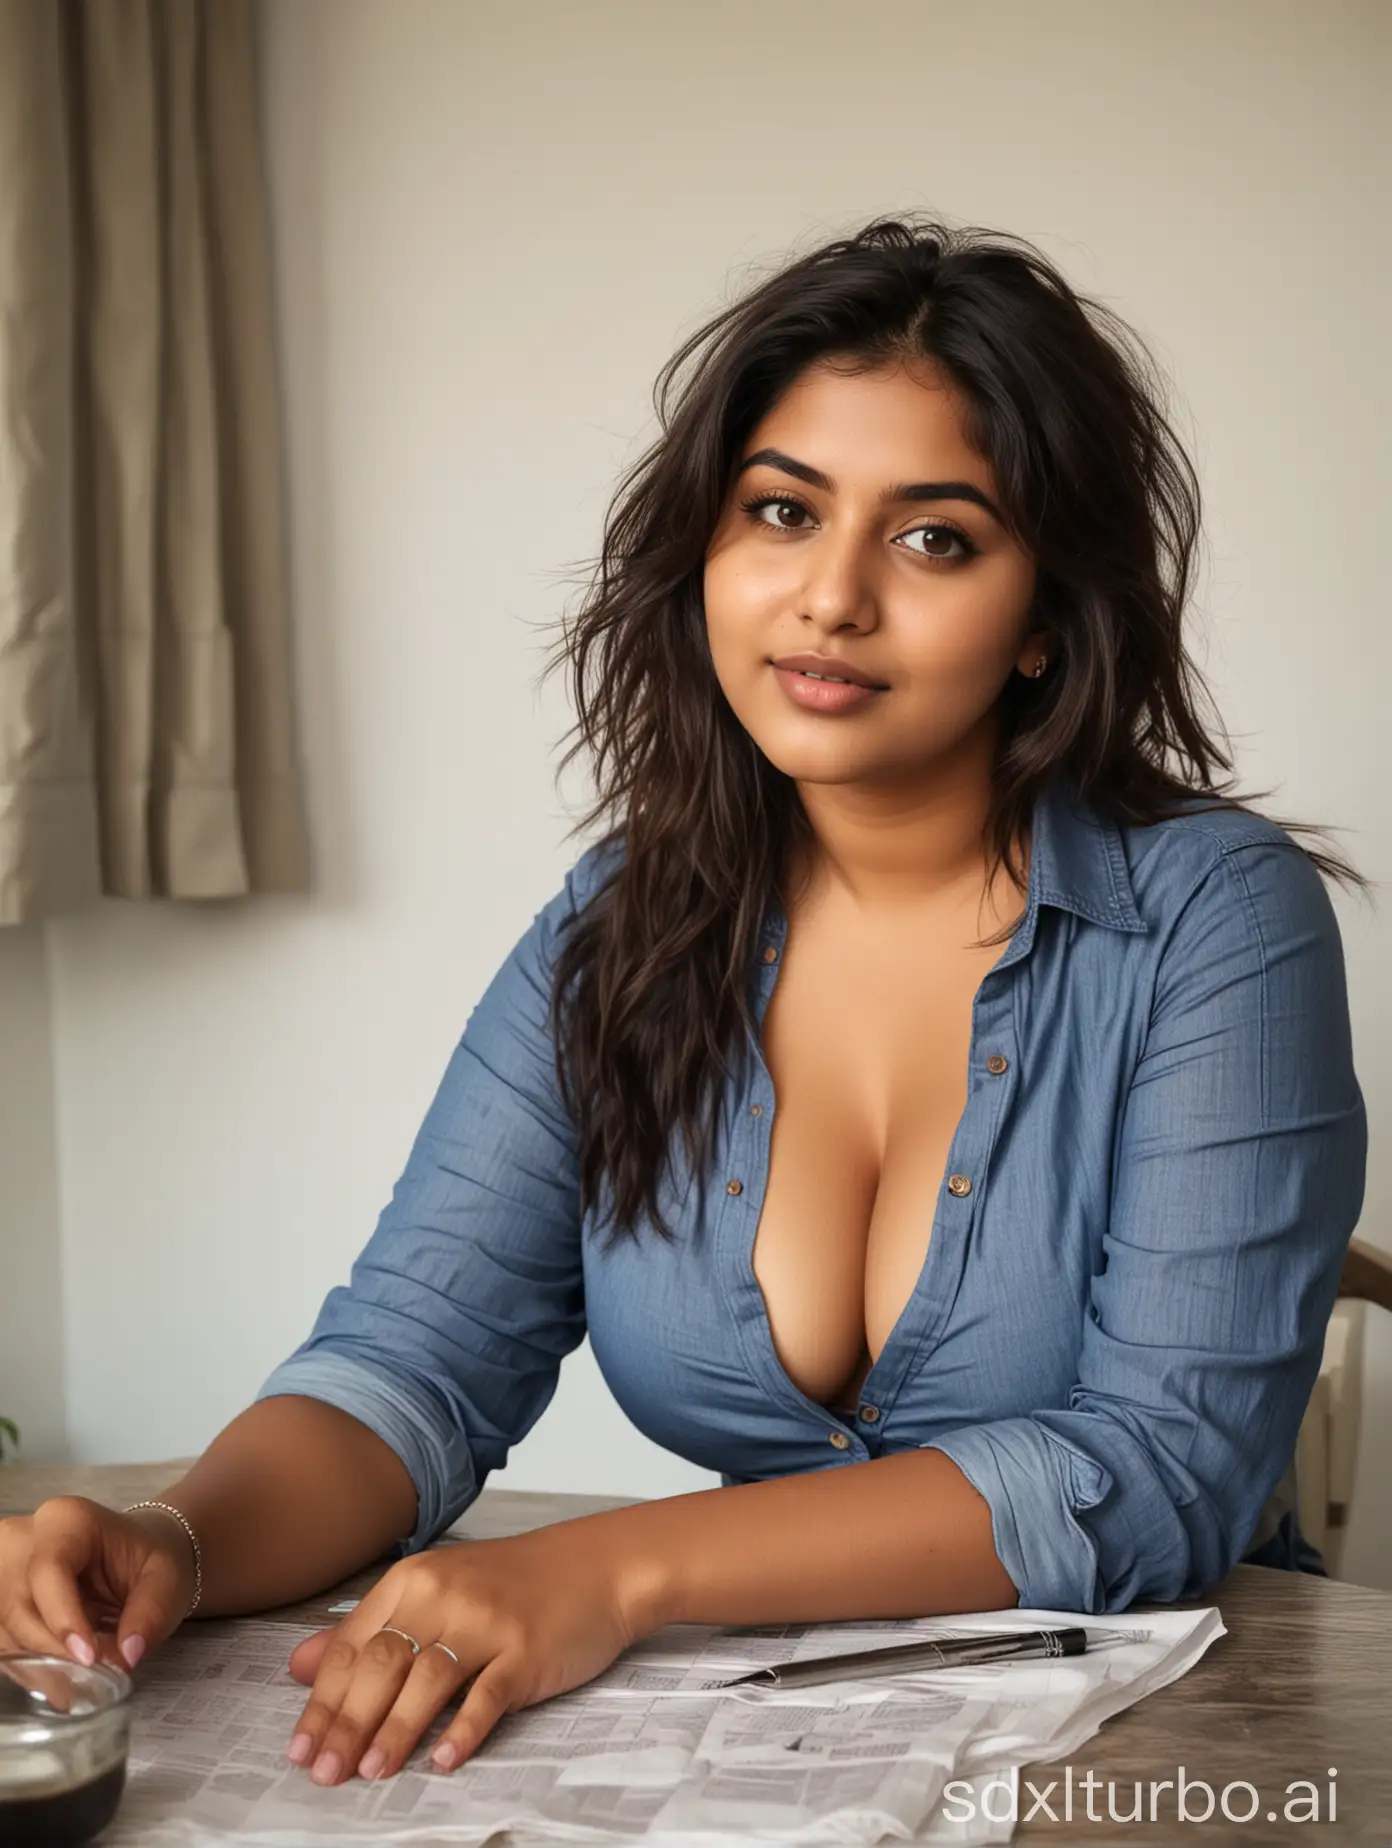 Sultry-Indian-Woman-with-Brunette-Layered-Hair-in-Unbuttoned-Shirt